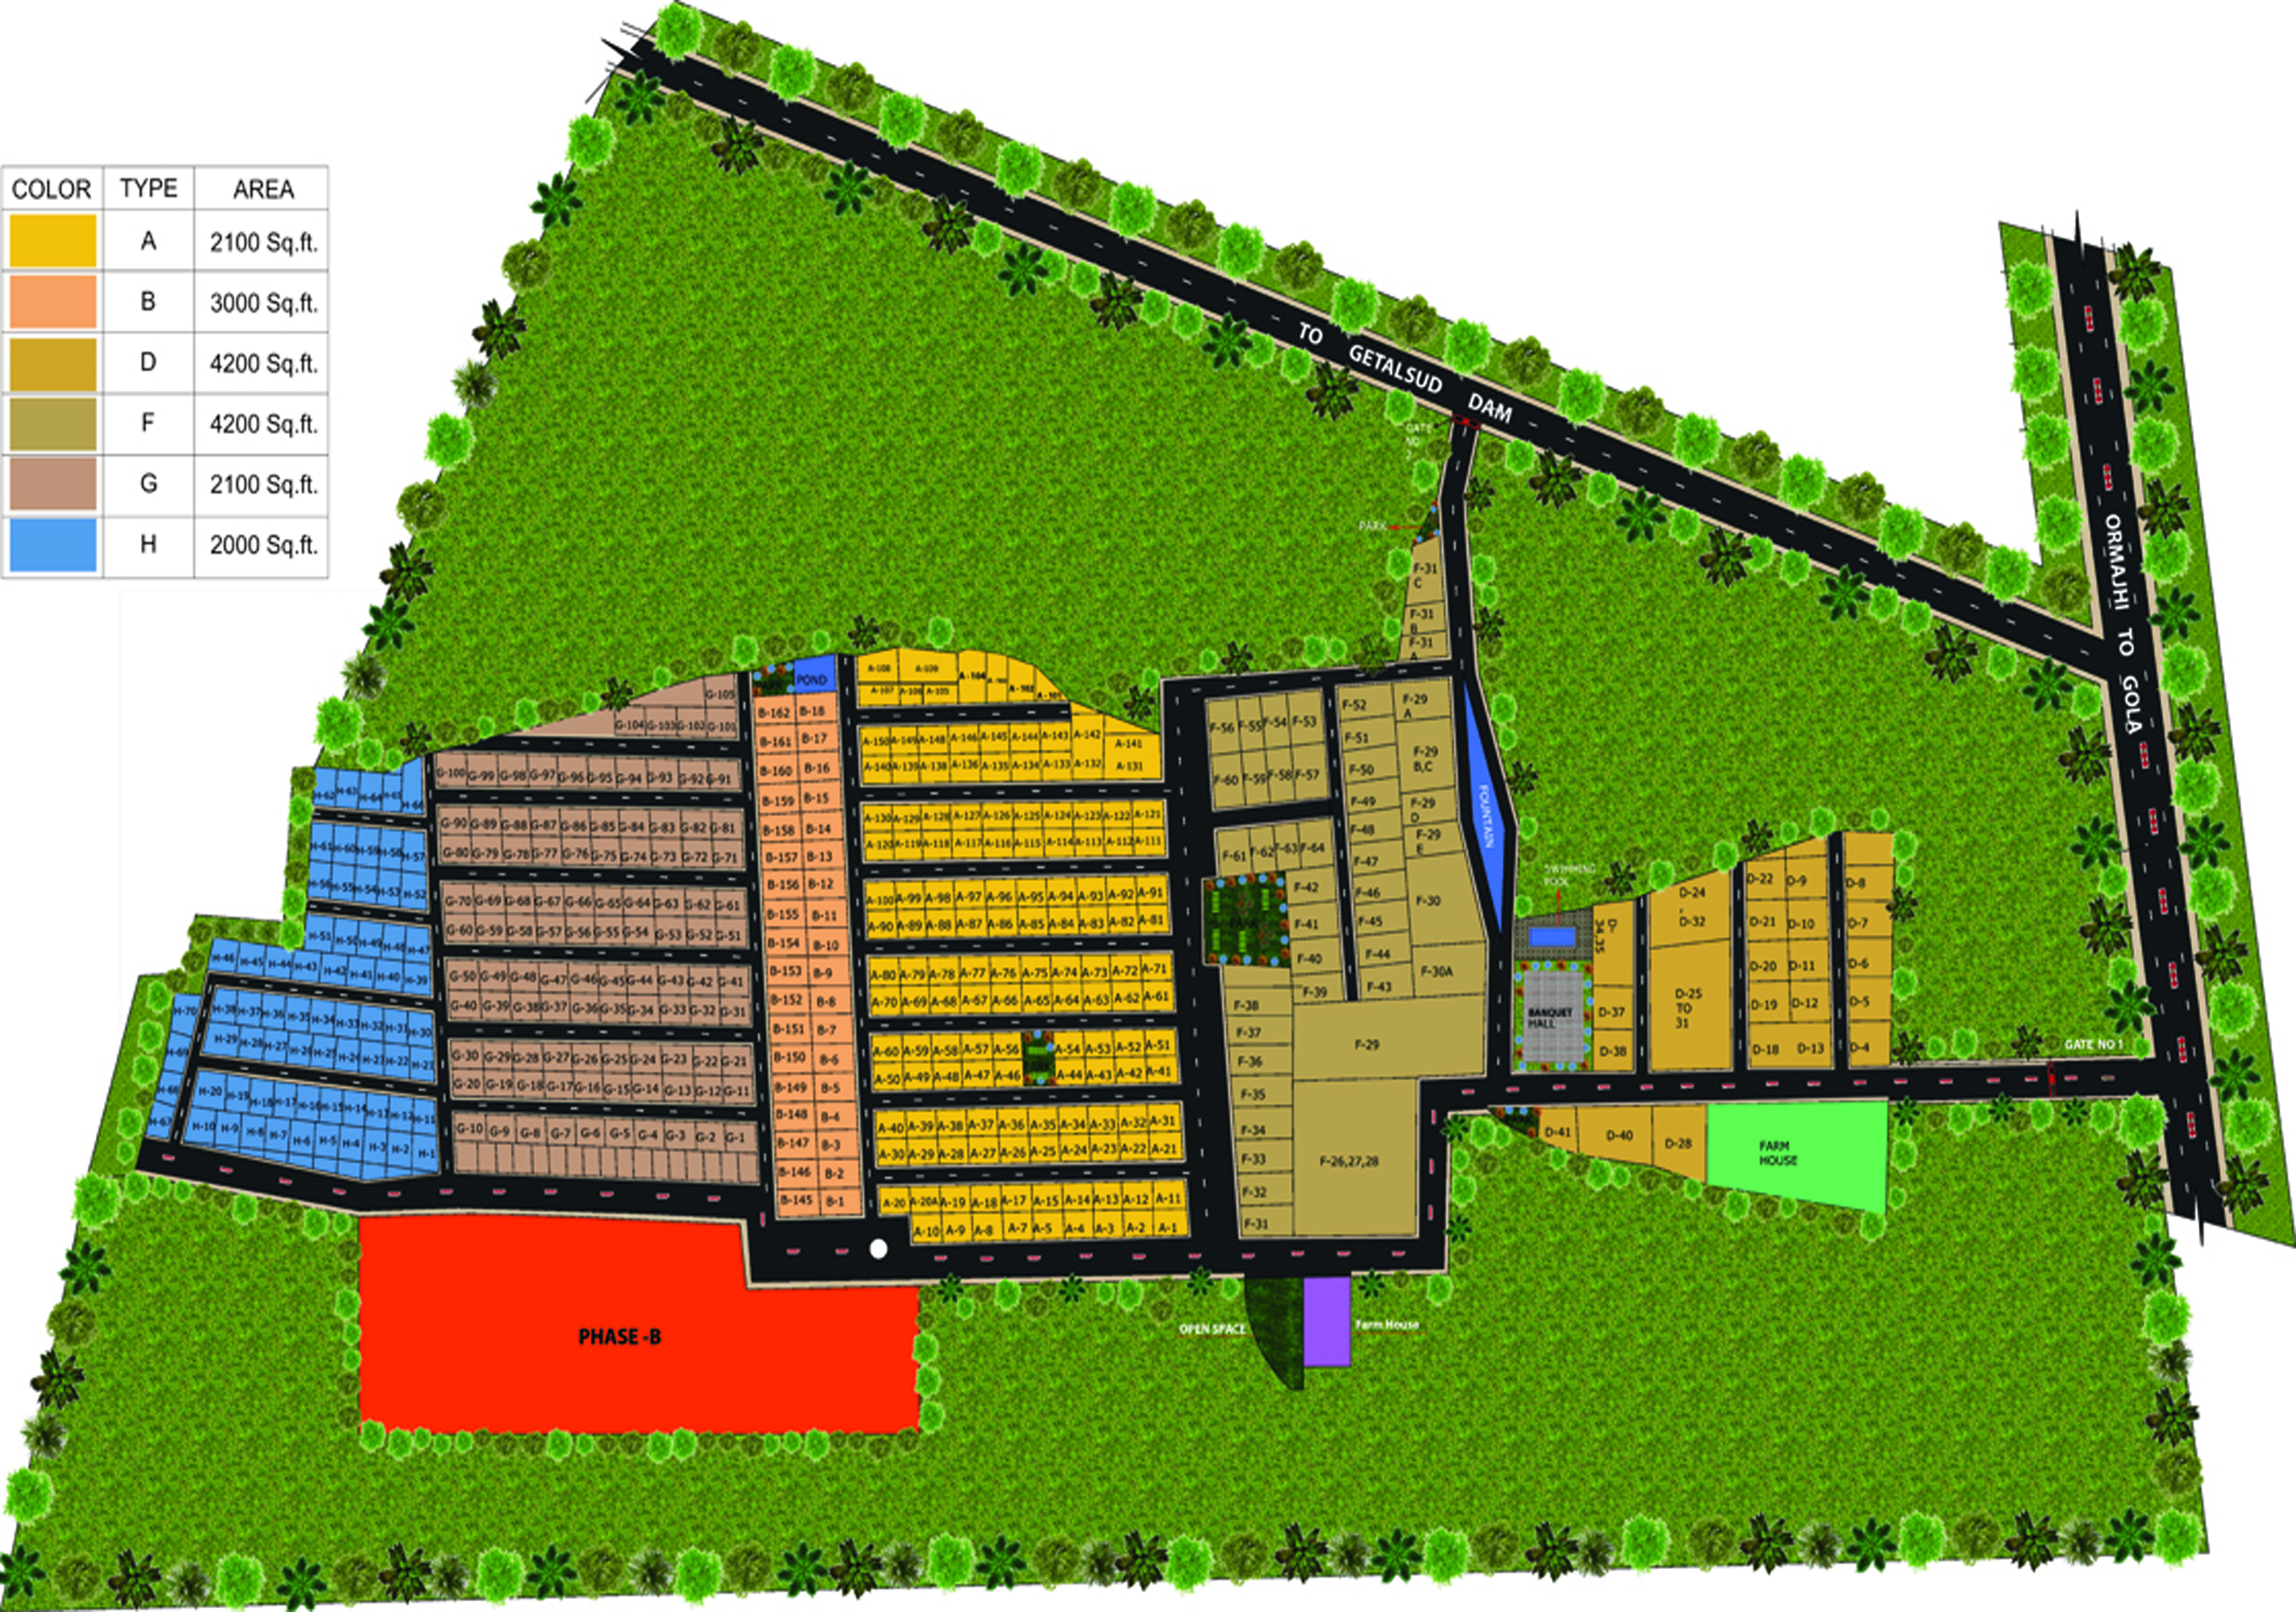 http://www.melodyrealtors.com/assets4/images/projects/hill_view_layout_Plan.jpg